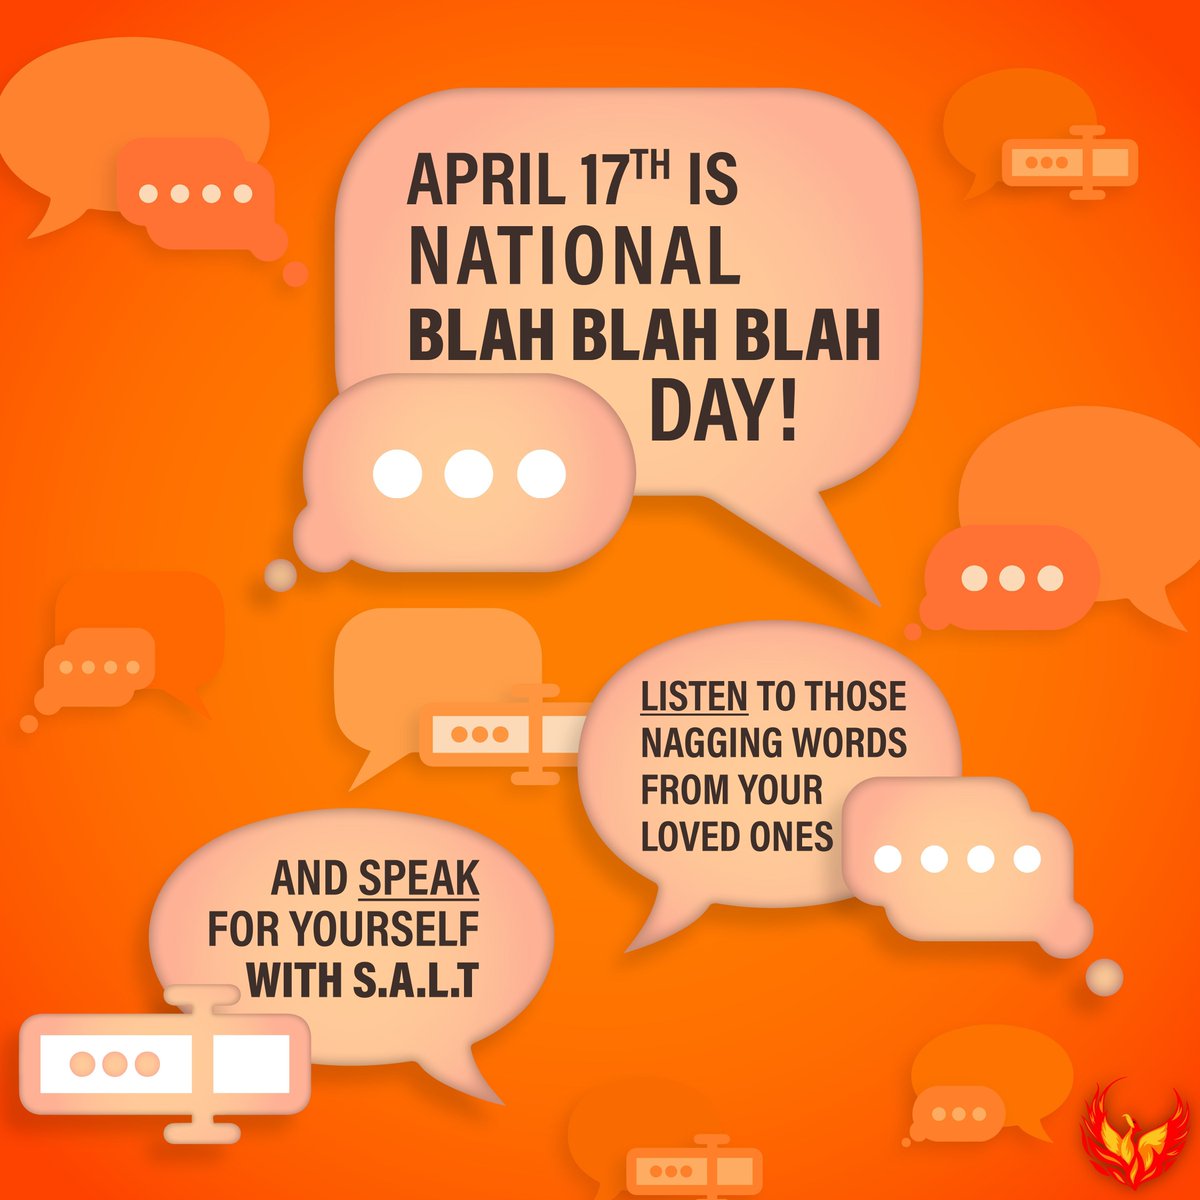 Happy National Blah Blah Blah Day! 🗣️✨

Turn those nagging words into action with S.A.L.T.! With S.A.L.T, hear and be heard, making every 'blah' count.

#NationalBlahBlahBlahDay #Communication #ExpressYourself #saltapp #aac #languagedisorder #accessiblecommunication